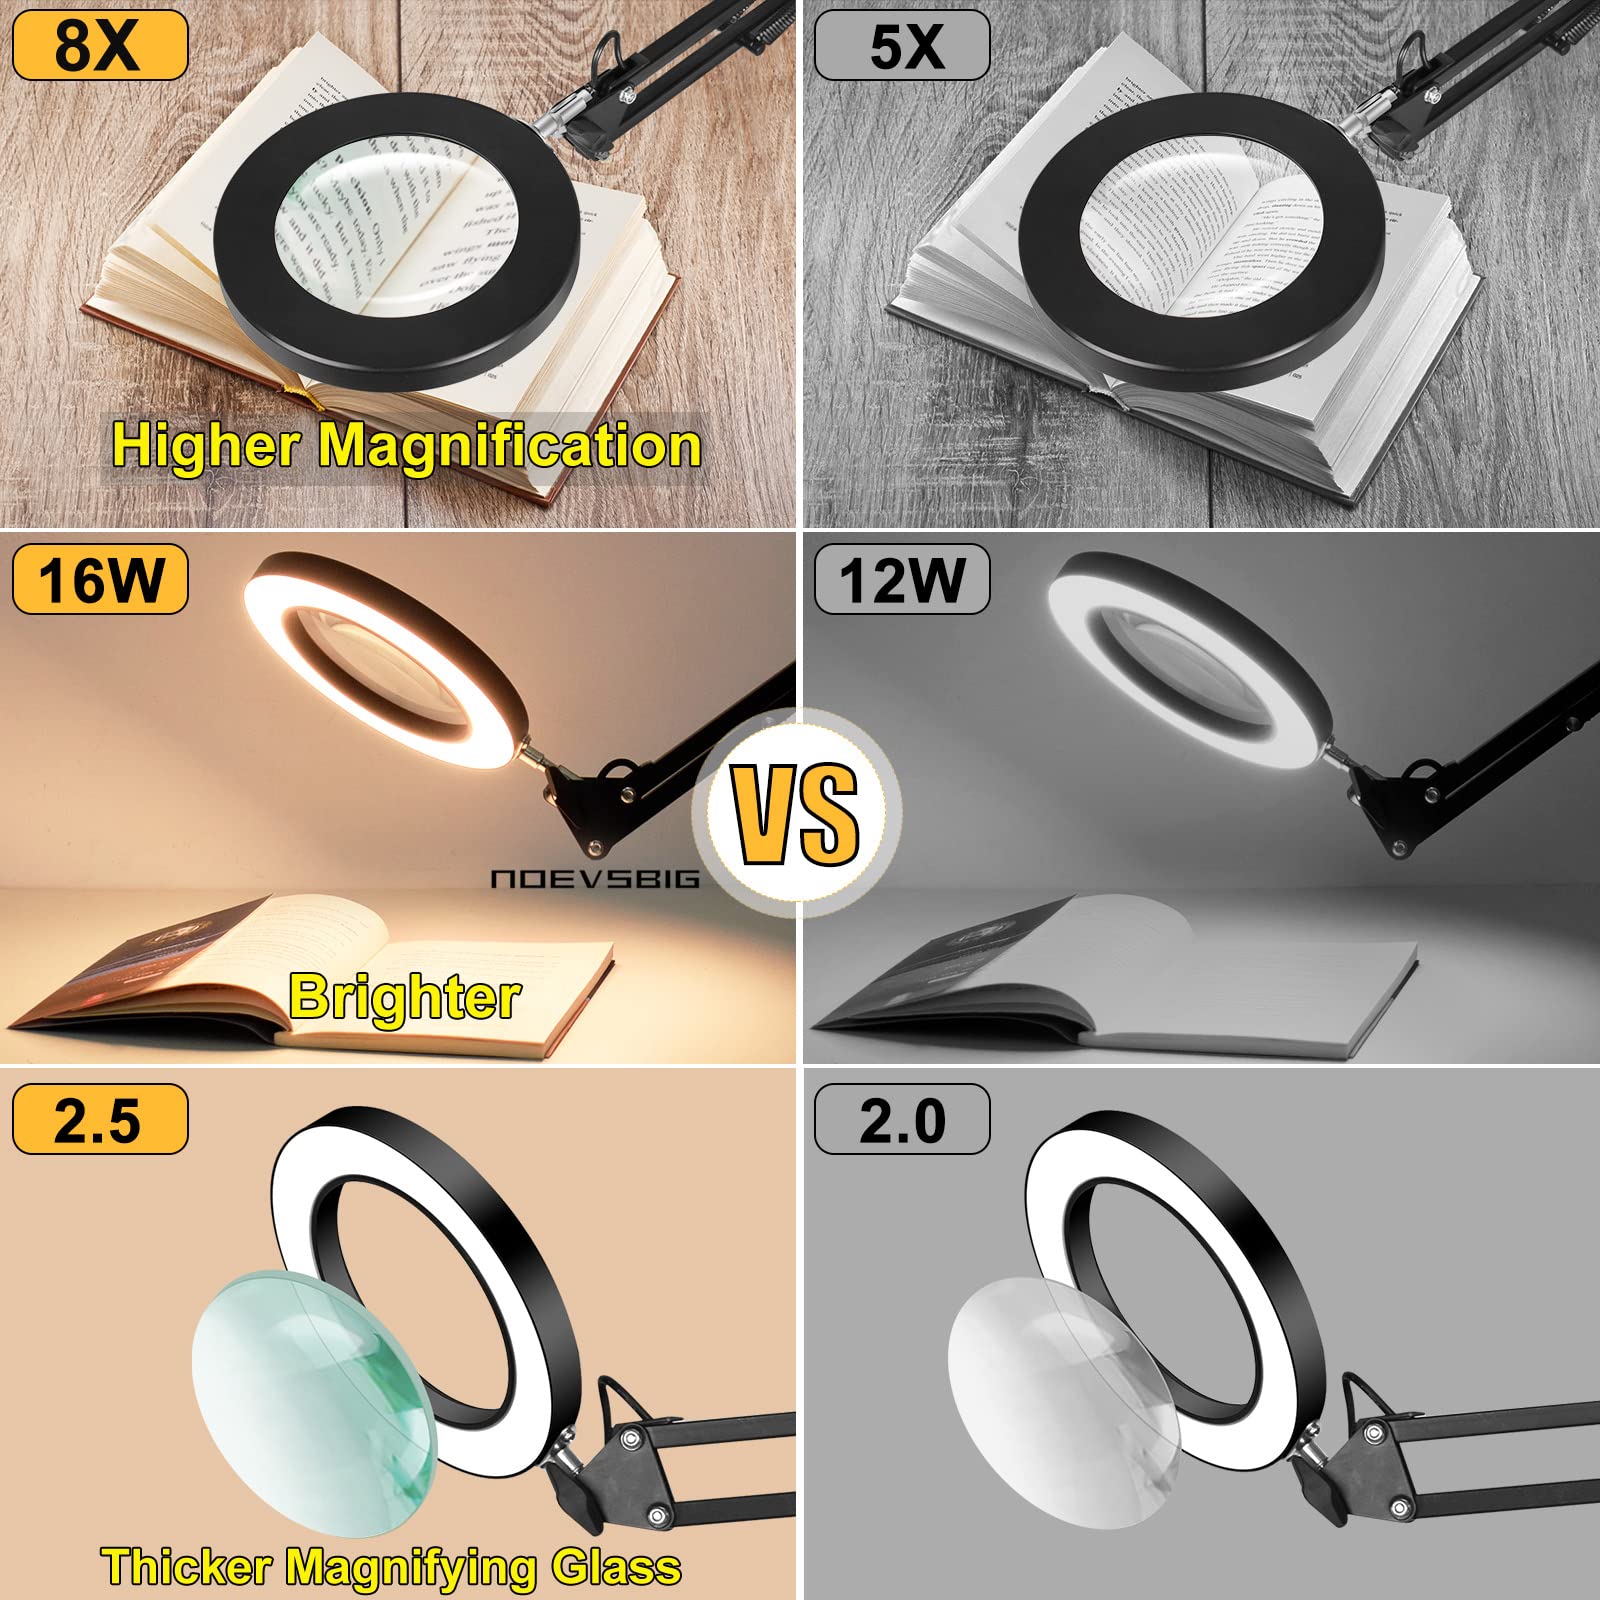 Magnifying Glass Desk Lamp with 3-Section Swing Arm and Big Clamp, Magnifying Glass with Light and Clamp, 8X Wide Desk Magnifier Light for Reading/Office/Soldering/Nail Beauty